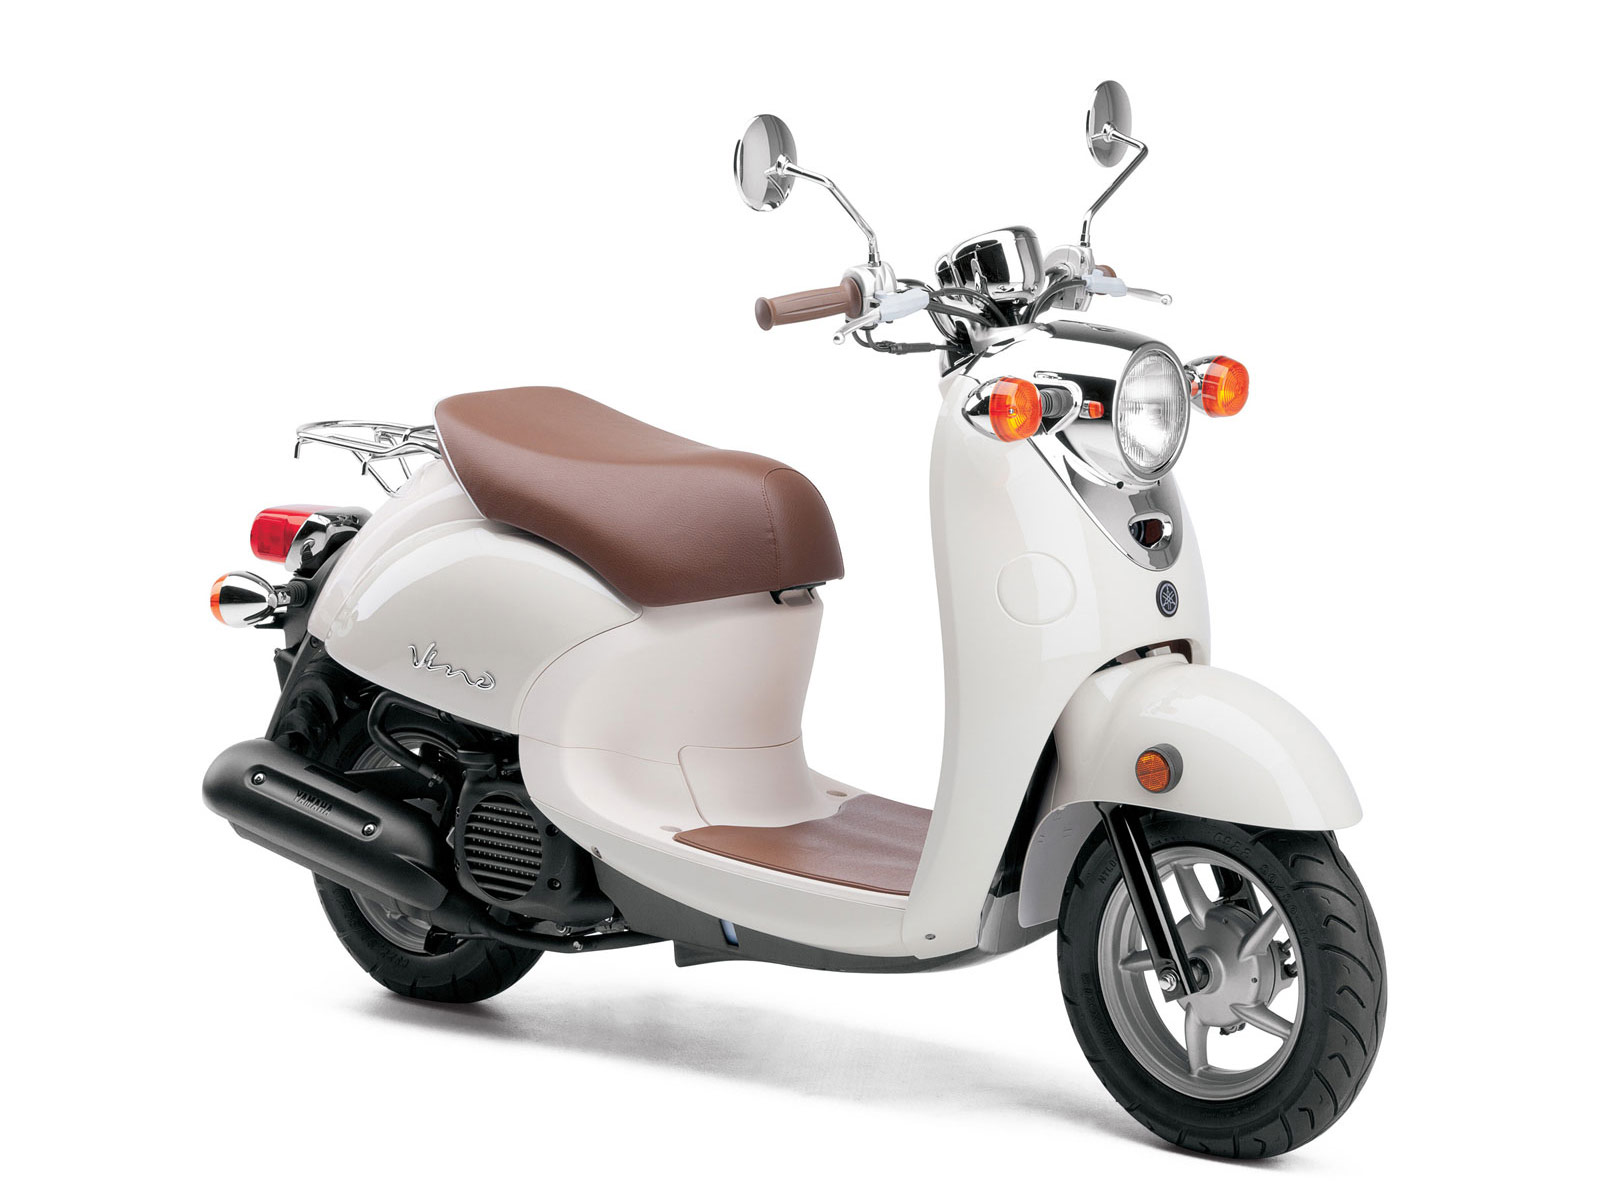 2013 Yamaha Vino Classic scooter pictures, specifications, Insurance